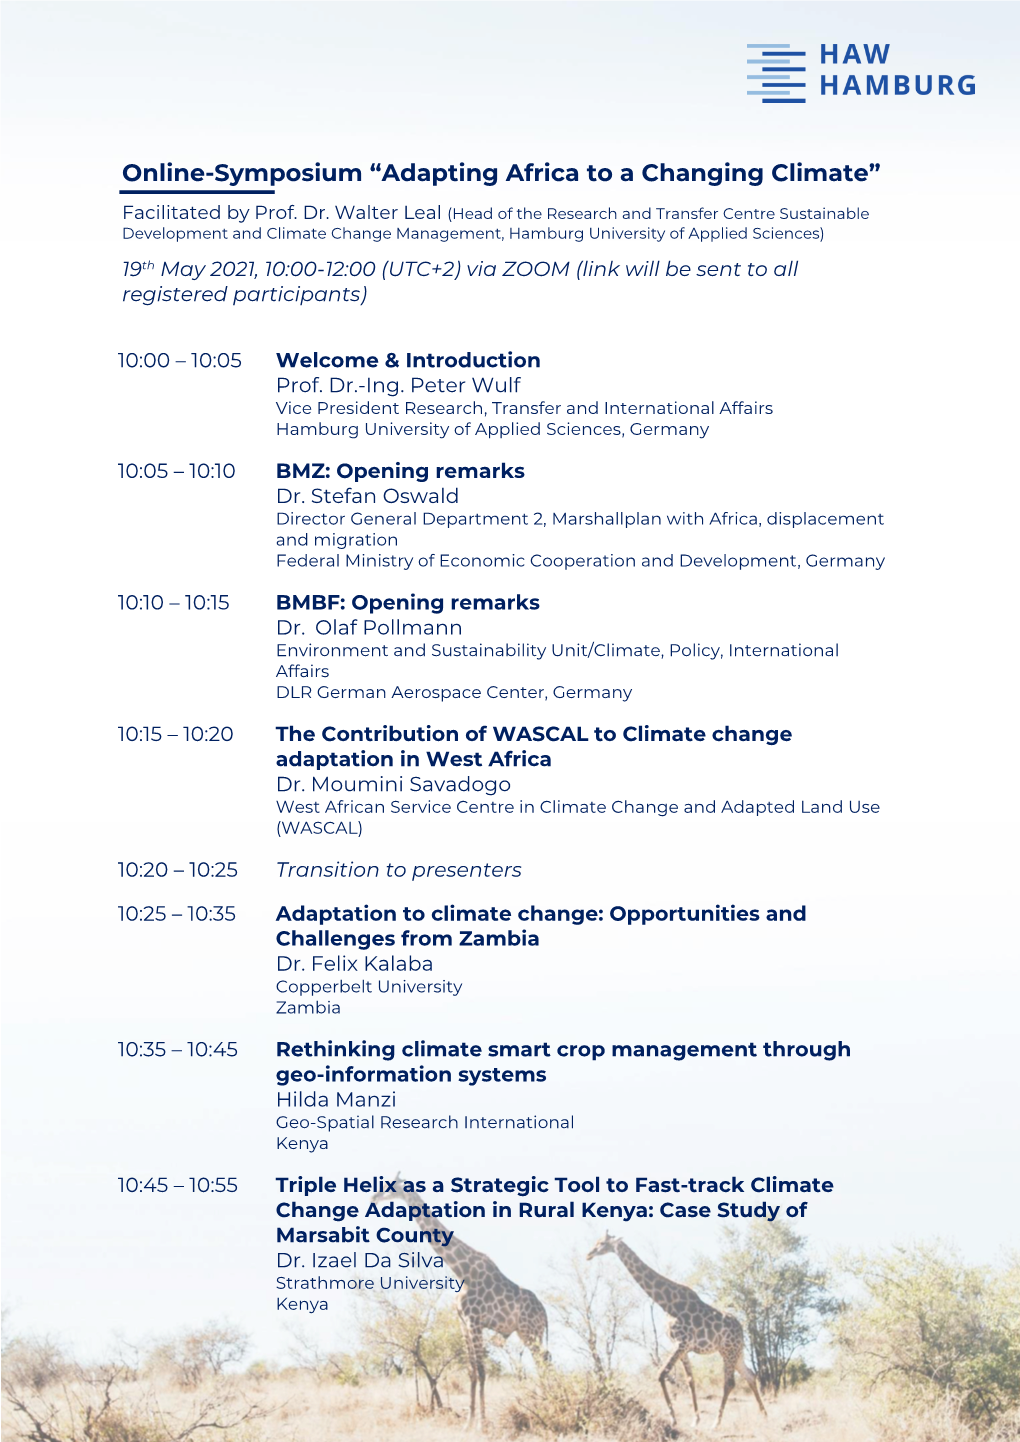 Online-Symposium “Adapting Africa to a Changing Climate”